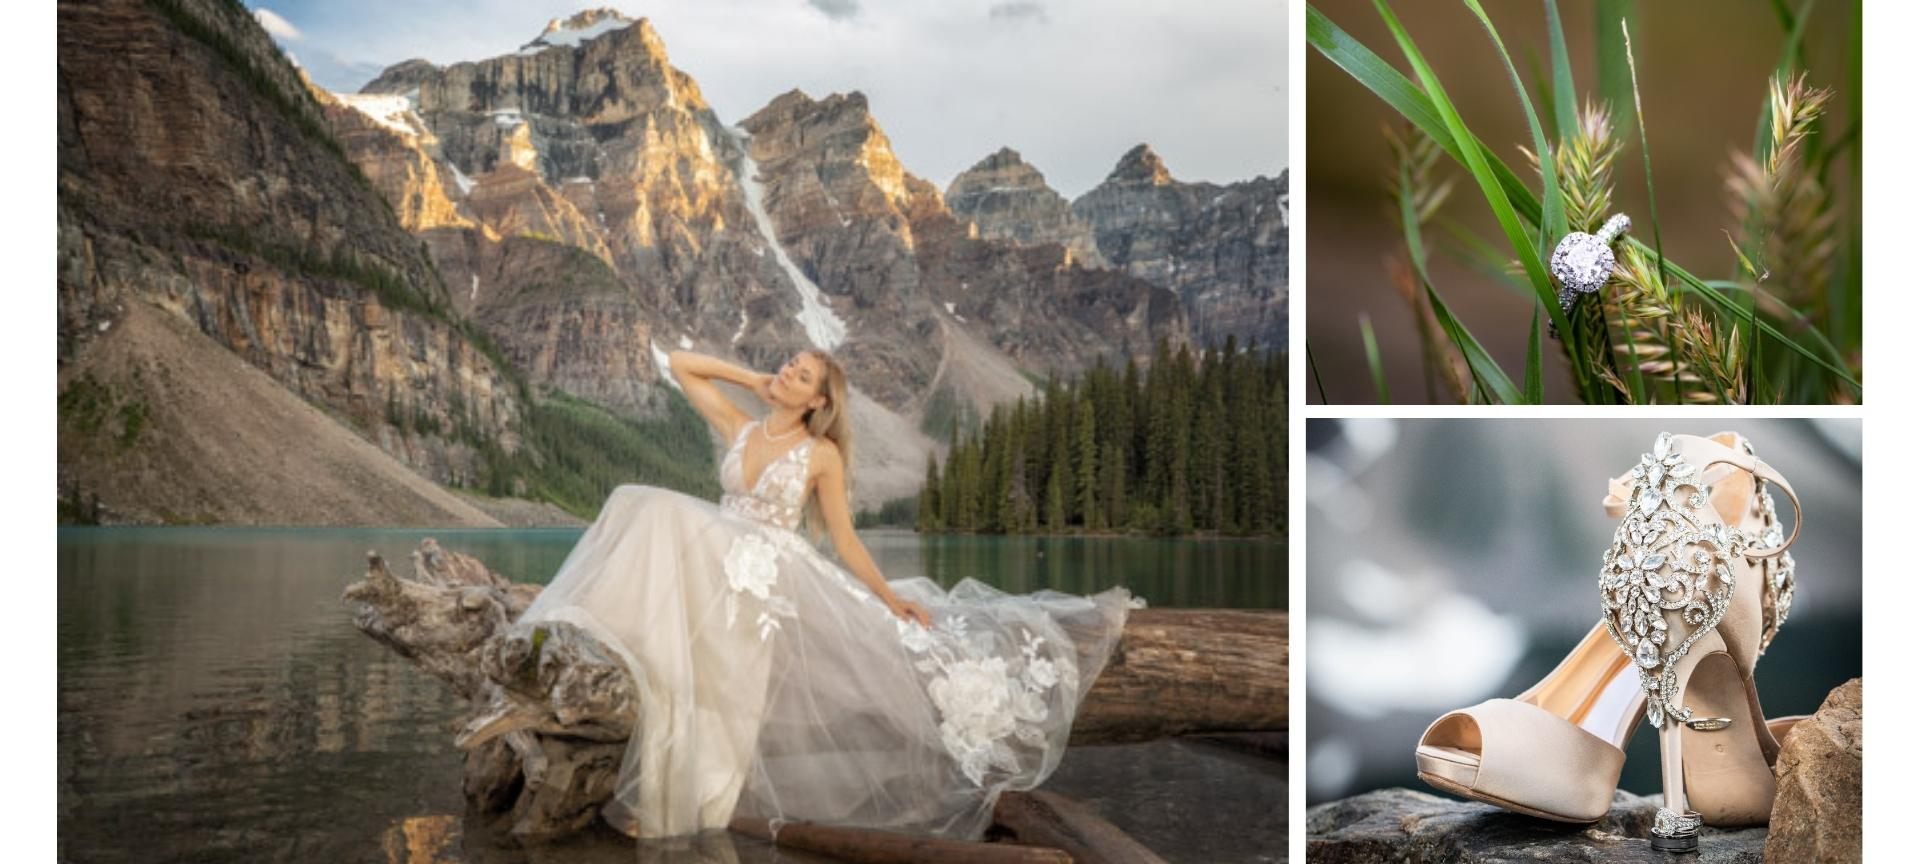 rocky mountains elopement at moraine lake - adventure wedding portraits of bride & close up of wedding details